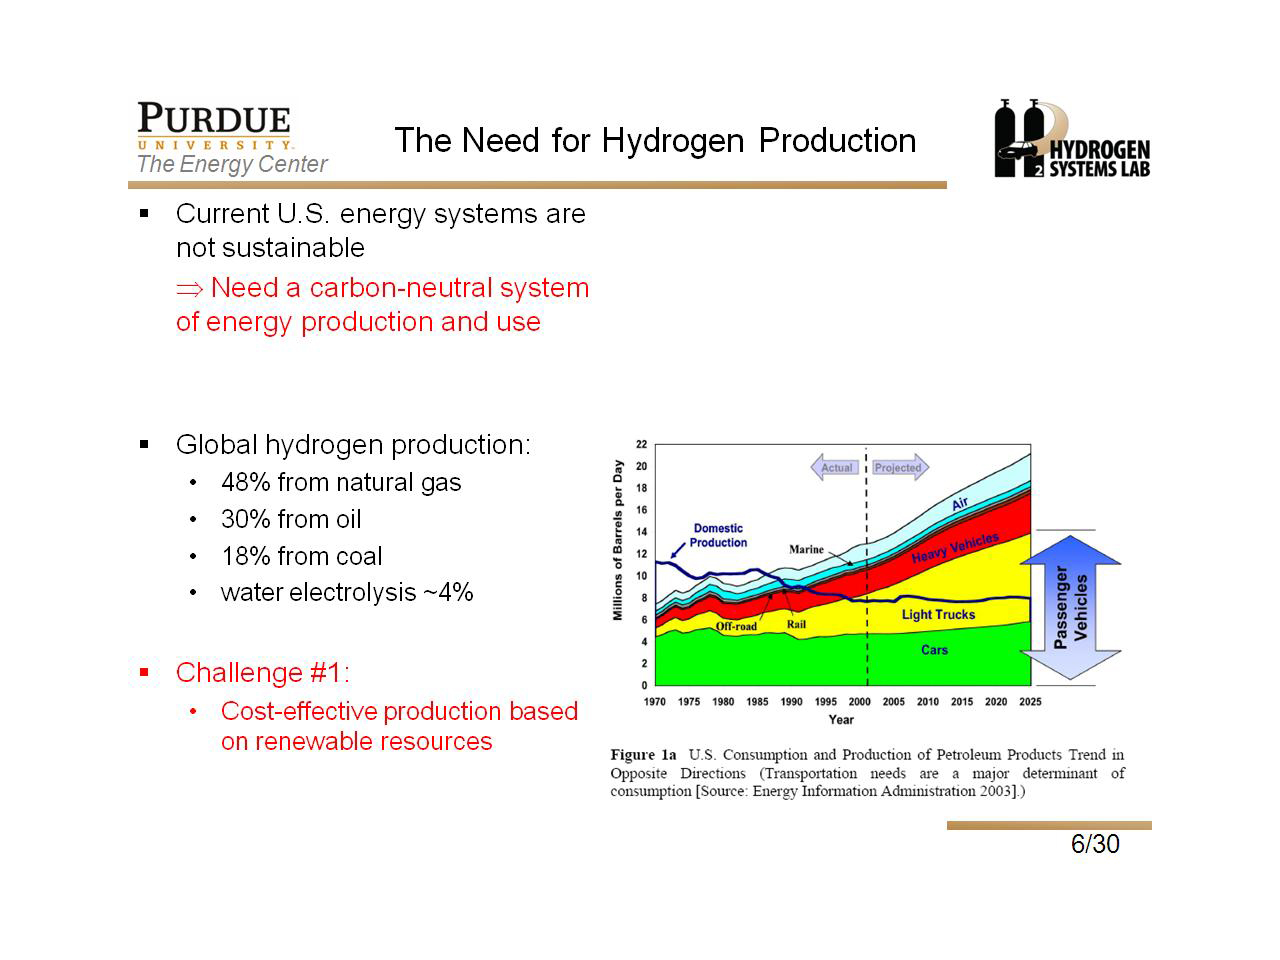 The Need for Hydrogen Production